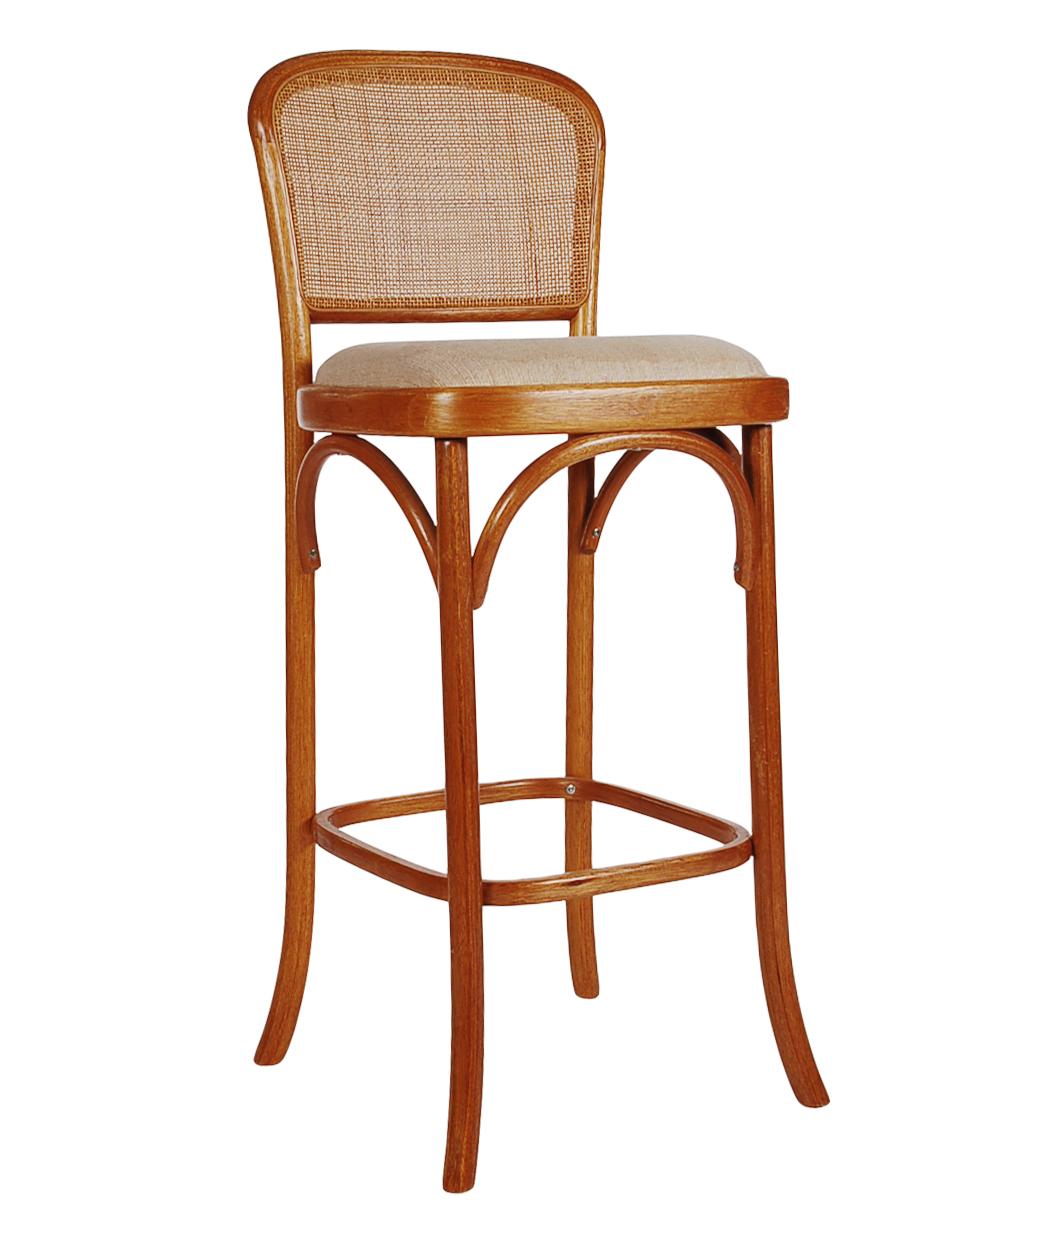 American Set of 4 Mid-Century Modern Cane Back Bar Stools after Le Corbusier for Thonet